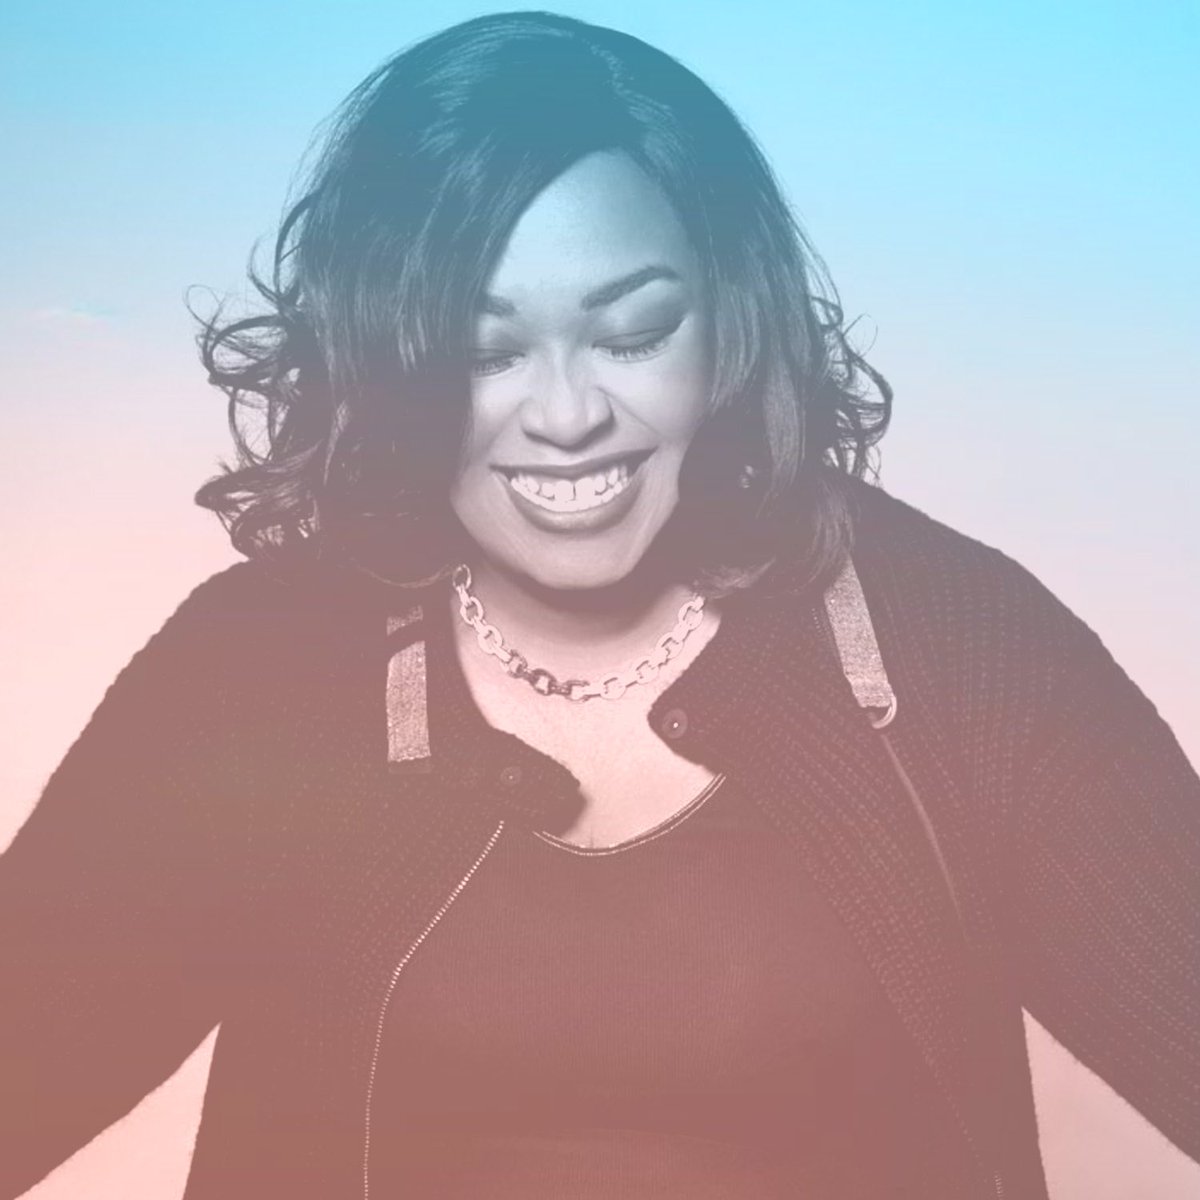 “You can waste your lives drawing lines. Or you can live your life crossing them.” @shondarhimes #MondayMuse https://t.co/RrkNog4vMT